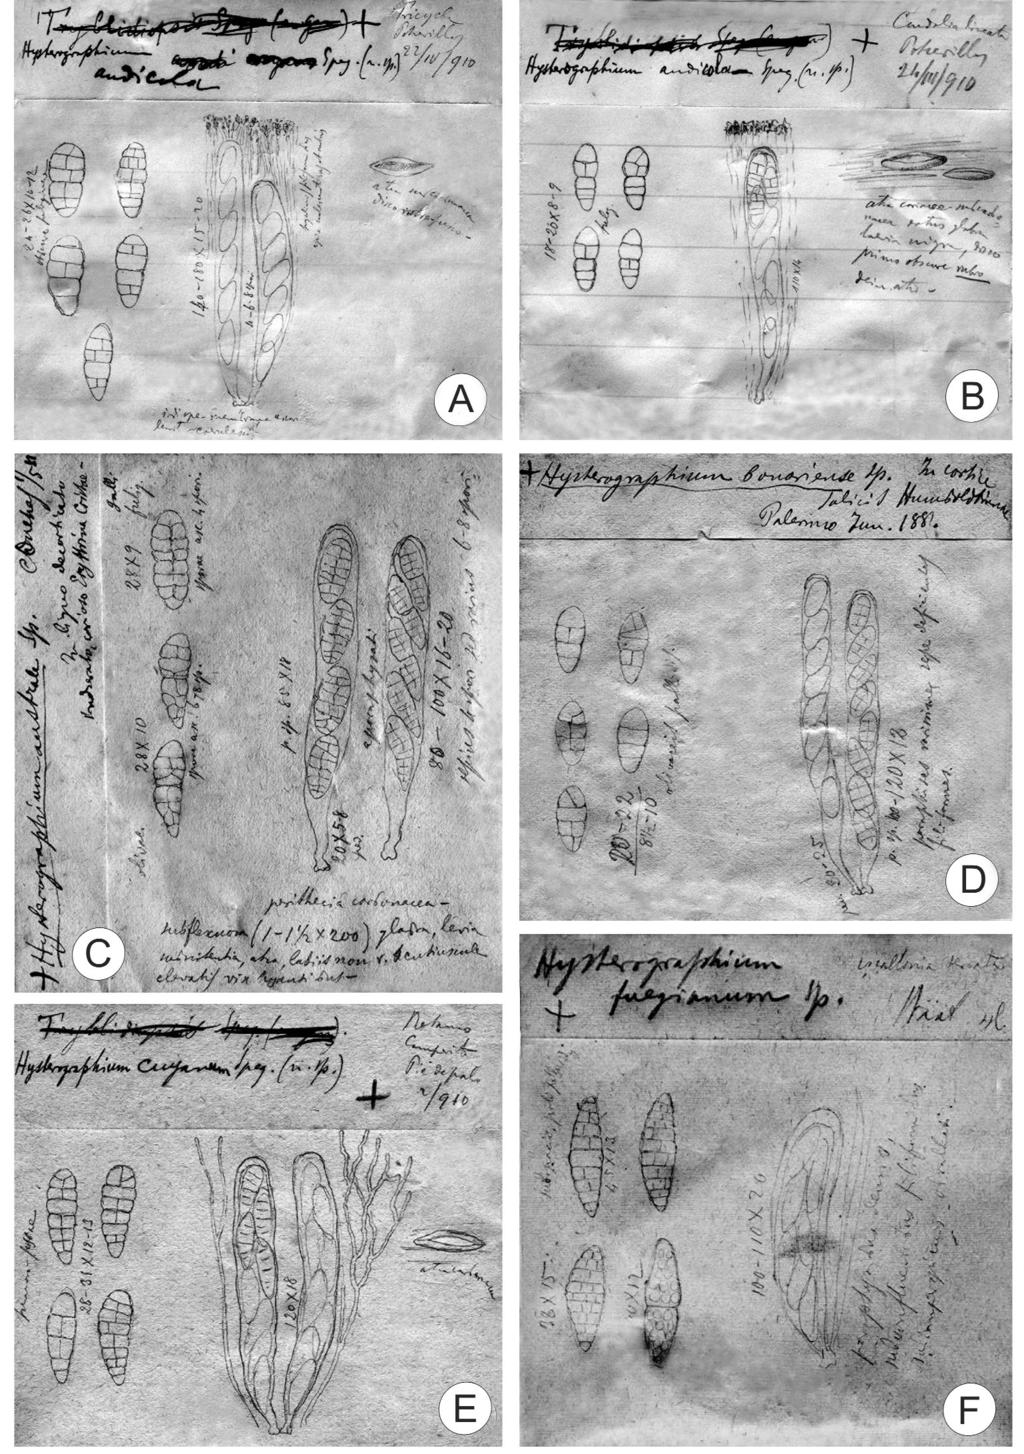 DARWINIANA 47(2) 289-296. 2009 Fig. 1. Herbarium packets of Spegazzini s type specimens of Hysterographium. A, H. andicola (lectotype LPS 1288- a). B, H. andicola (LPS 1288-b).